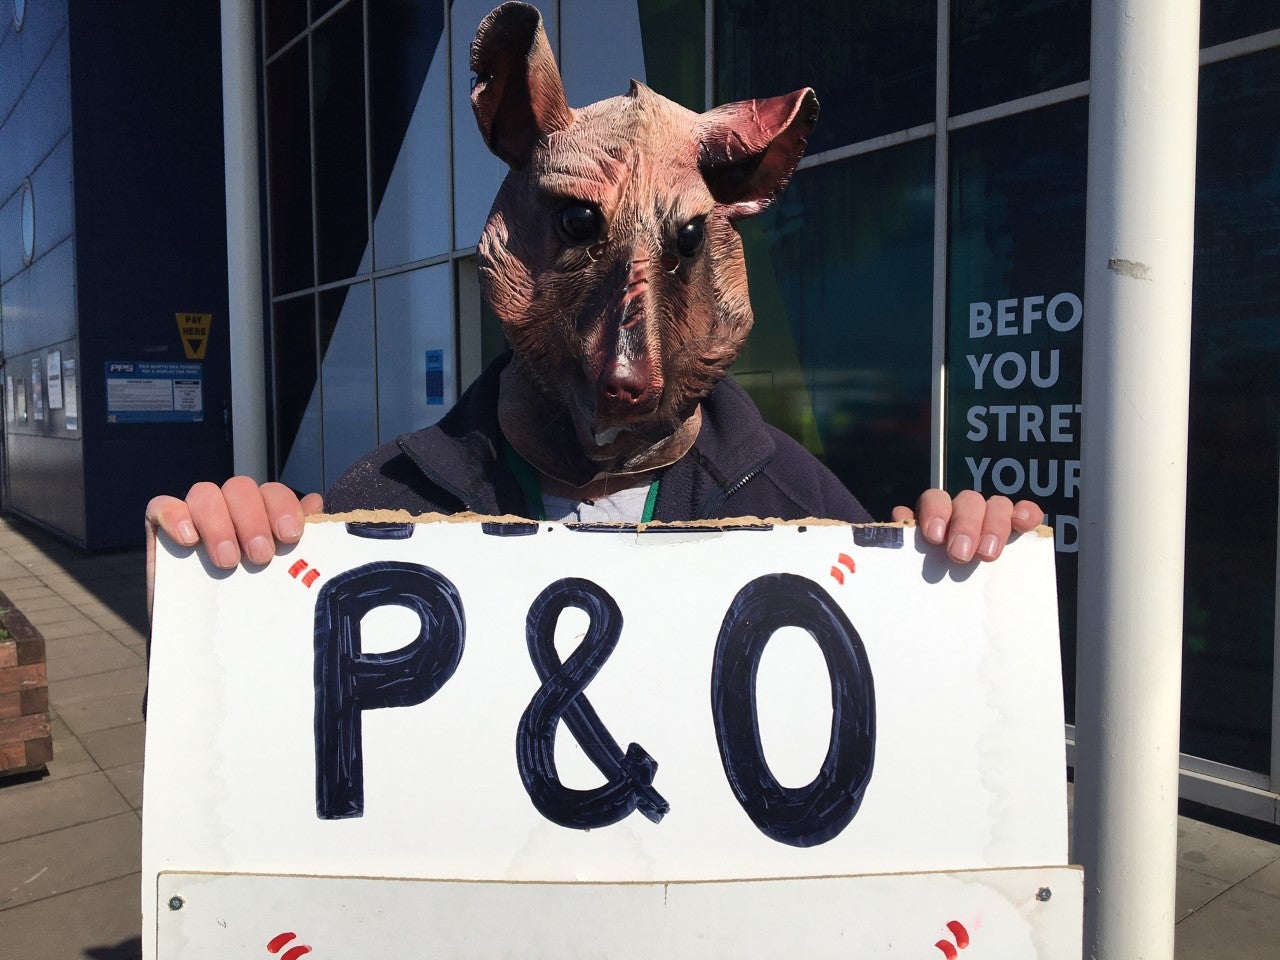 Neil Dawson joined the demonstration dressed as a ship rat